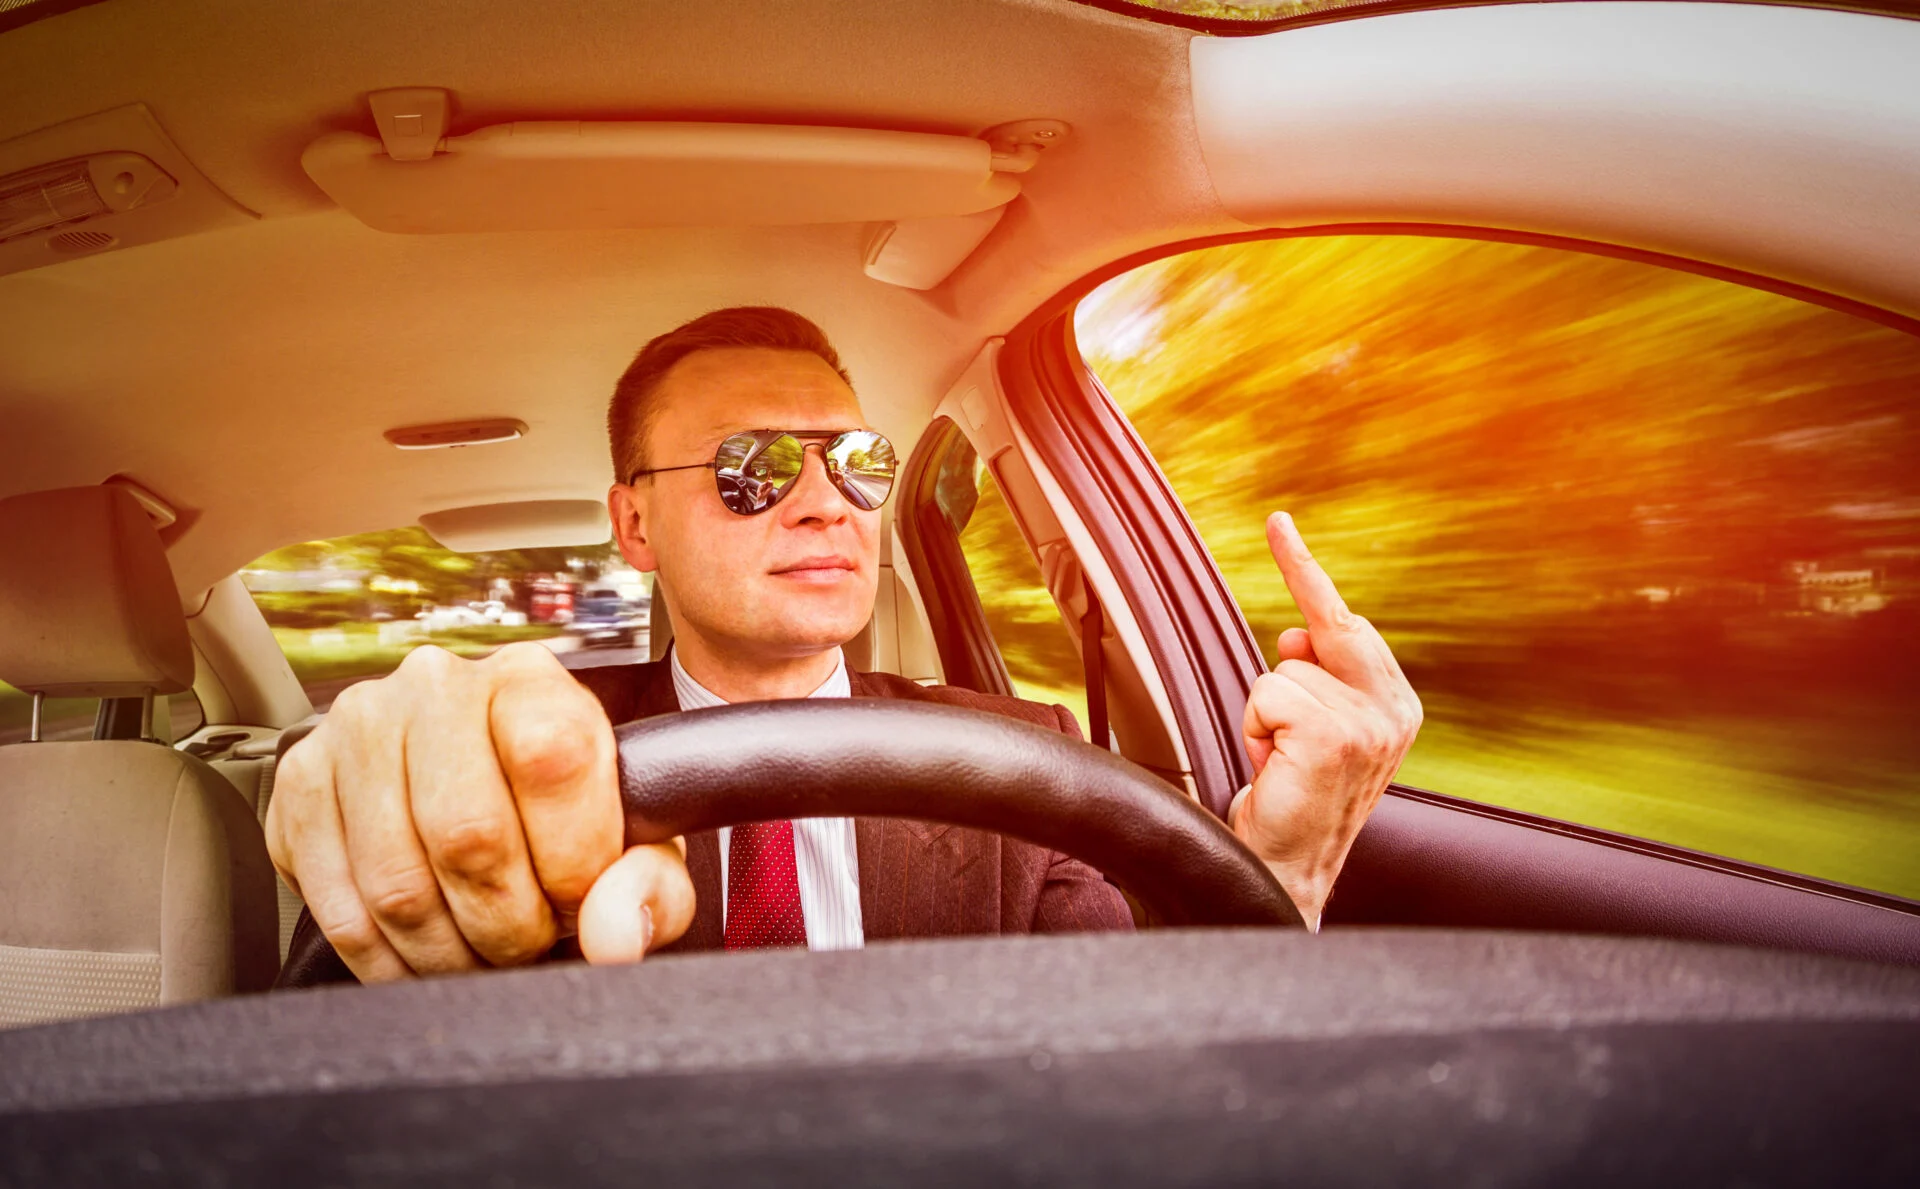 header image for are people in connecticut rude. a man driving a car and putting his middle finger up.